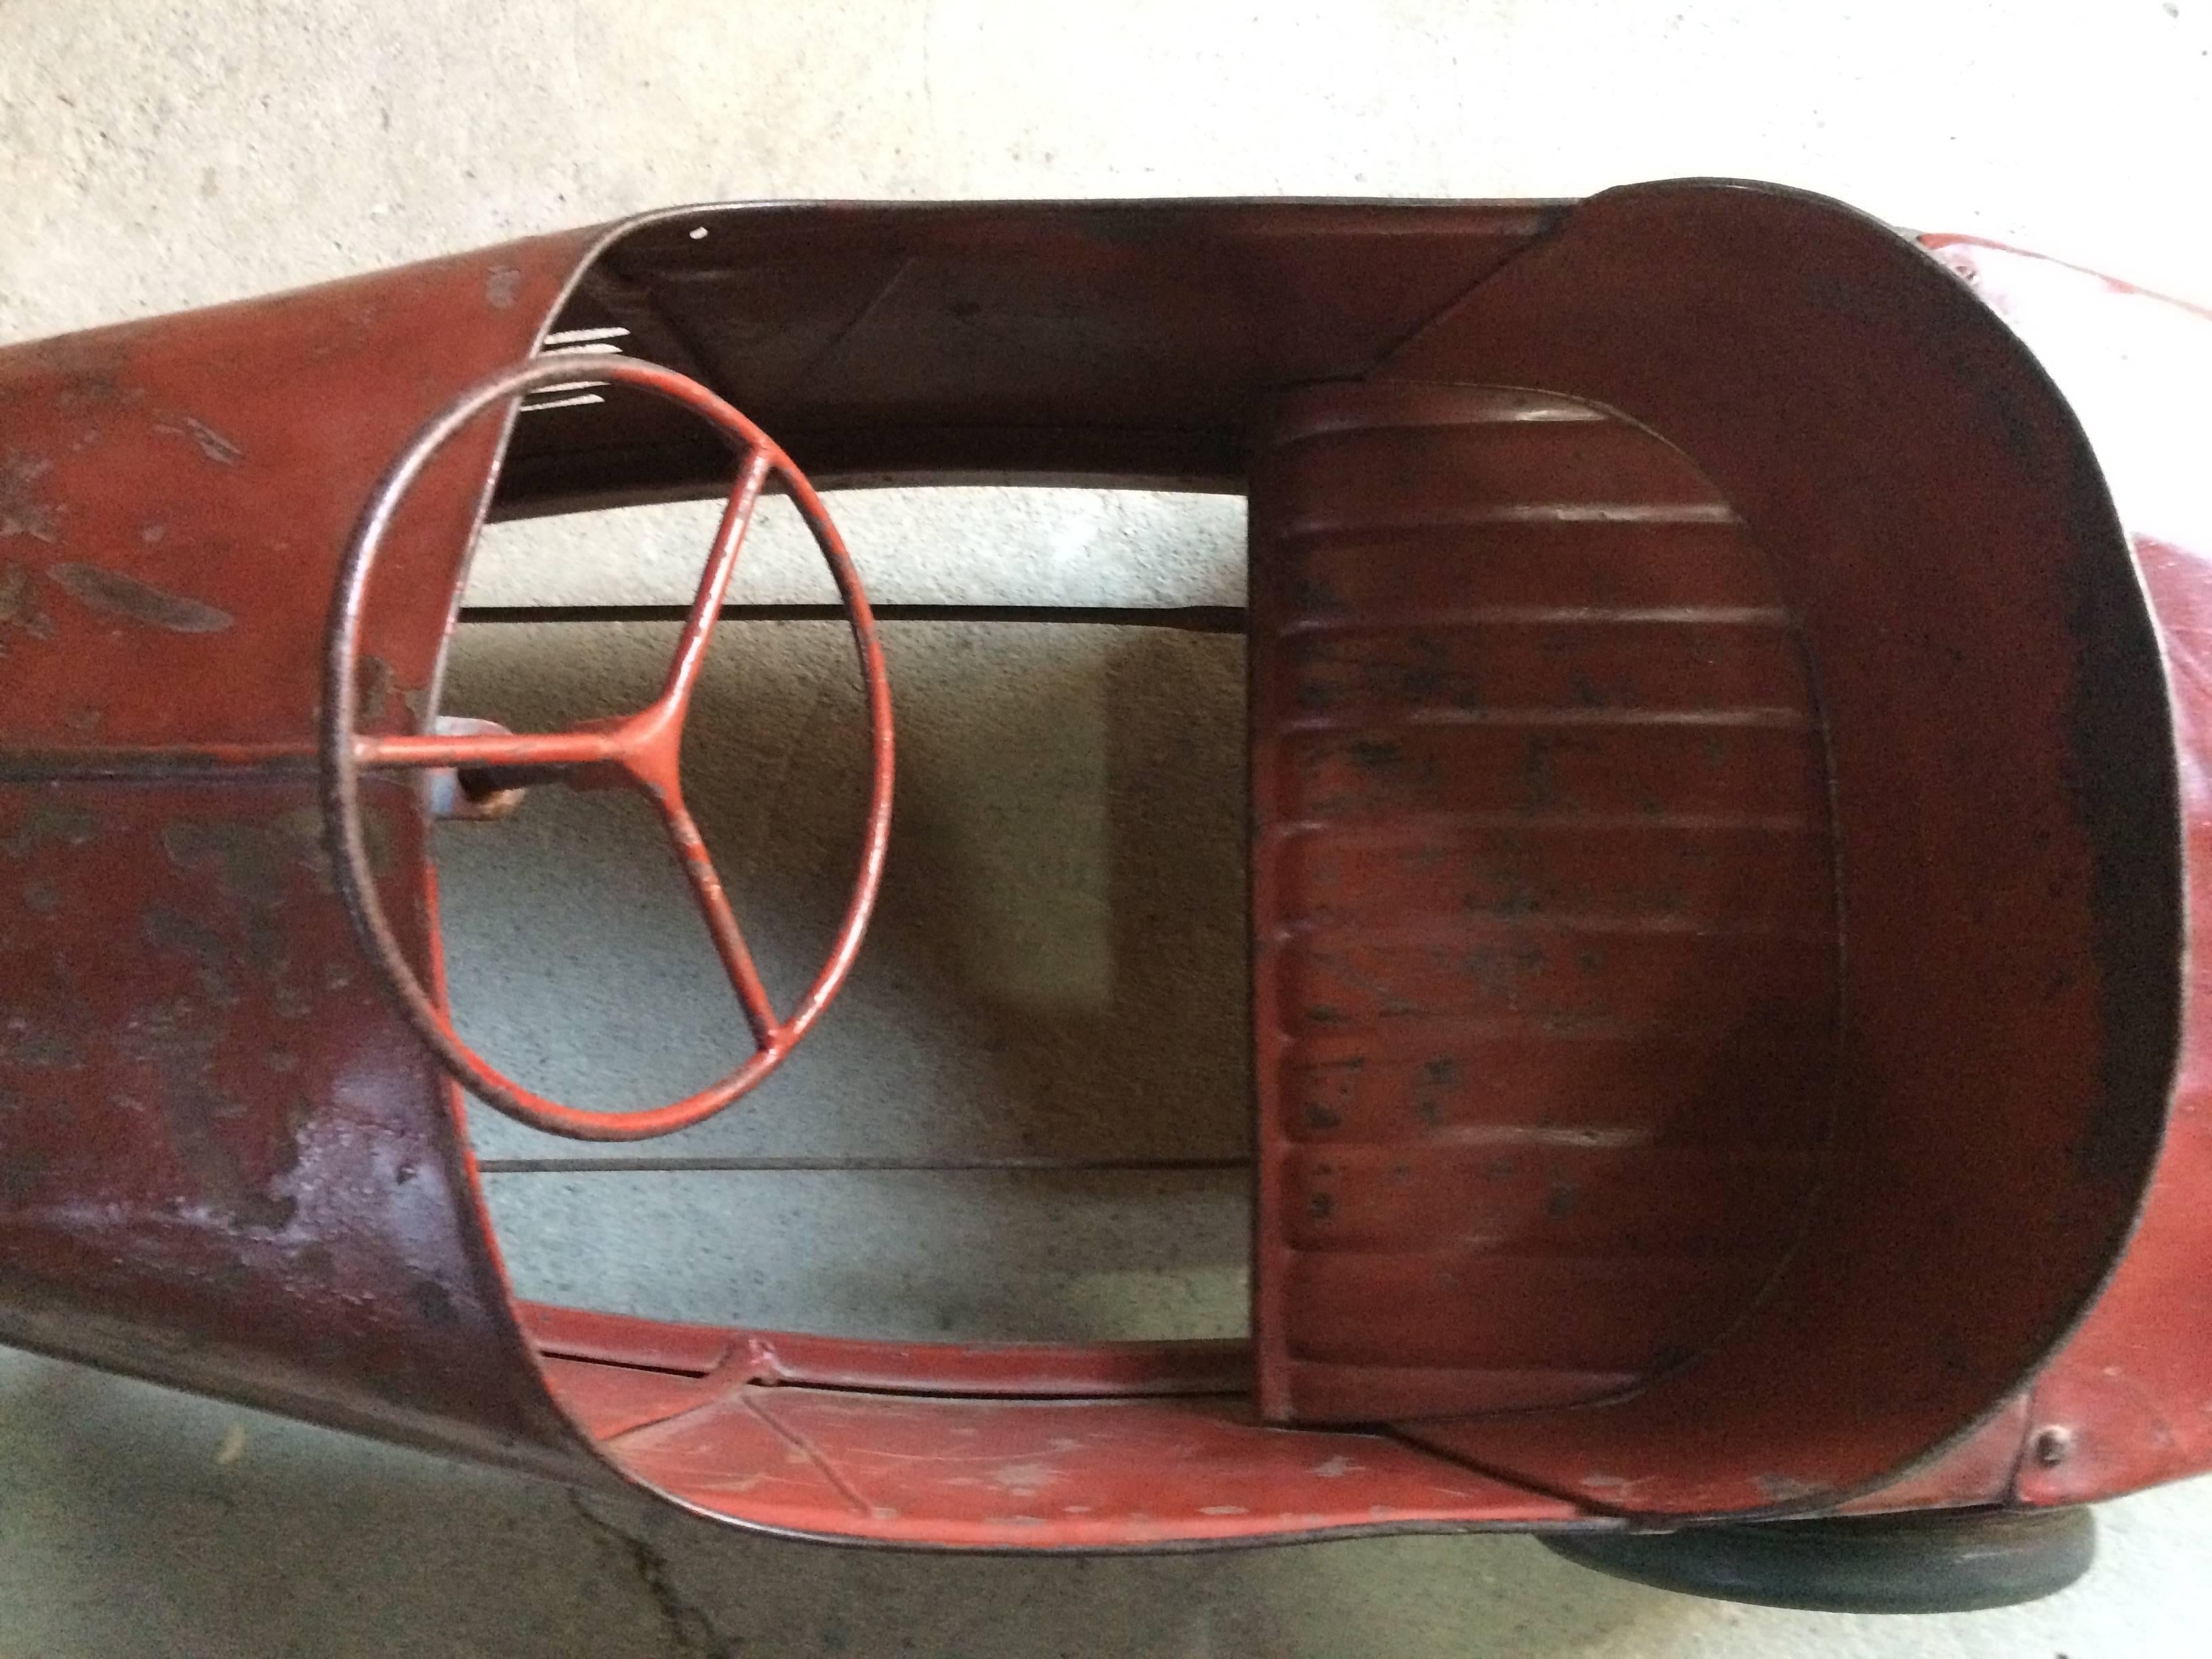 Stunning Vintage Delage Boat Tail Racer Pedal Car Distressed Loft Style, 1935 In Distressed Condition In Longdon, Tewkesbury